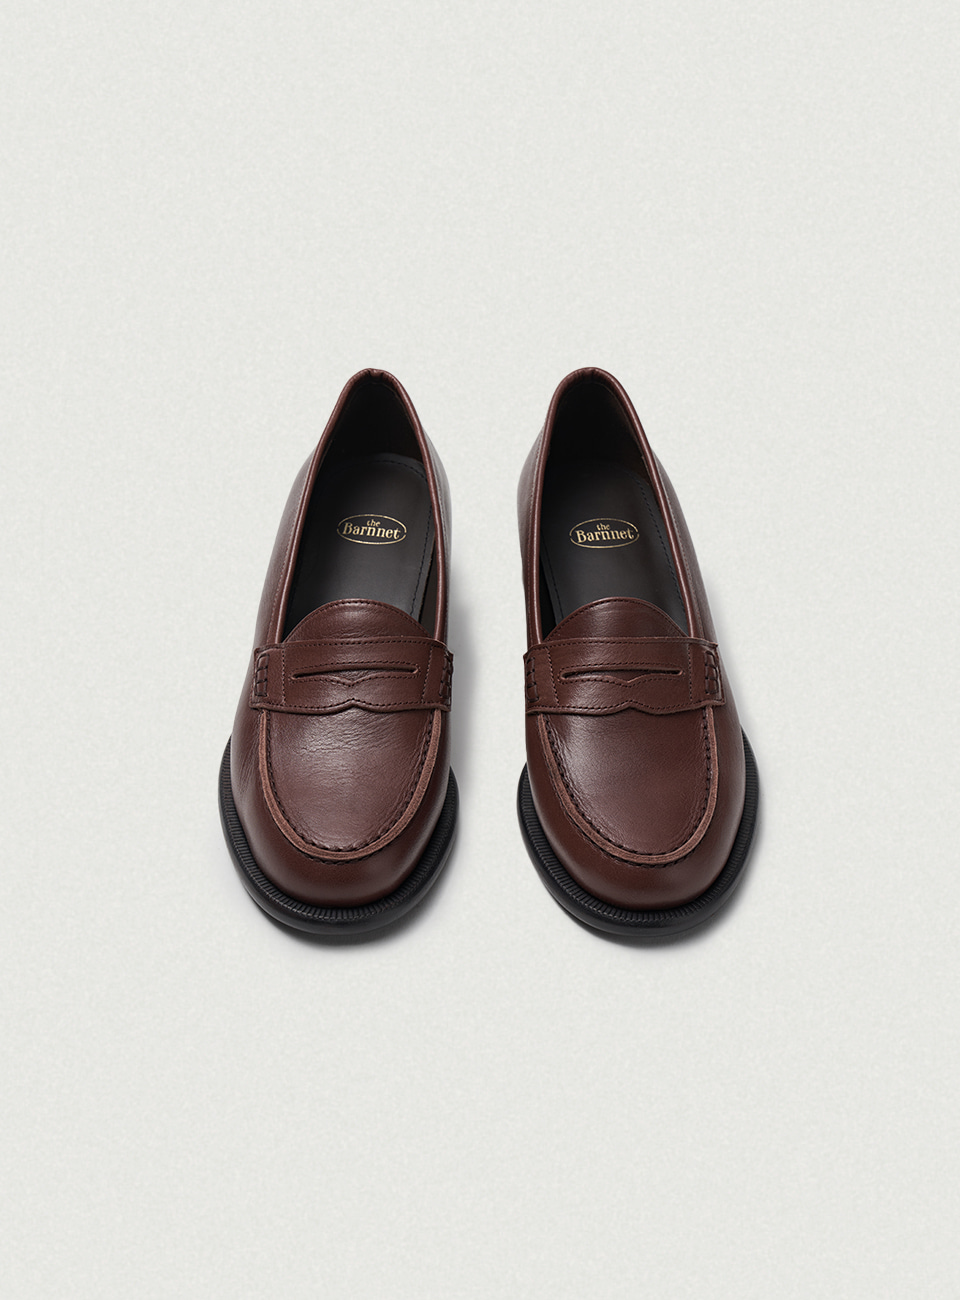 Brown Leather Penny Loafers